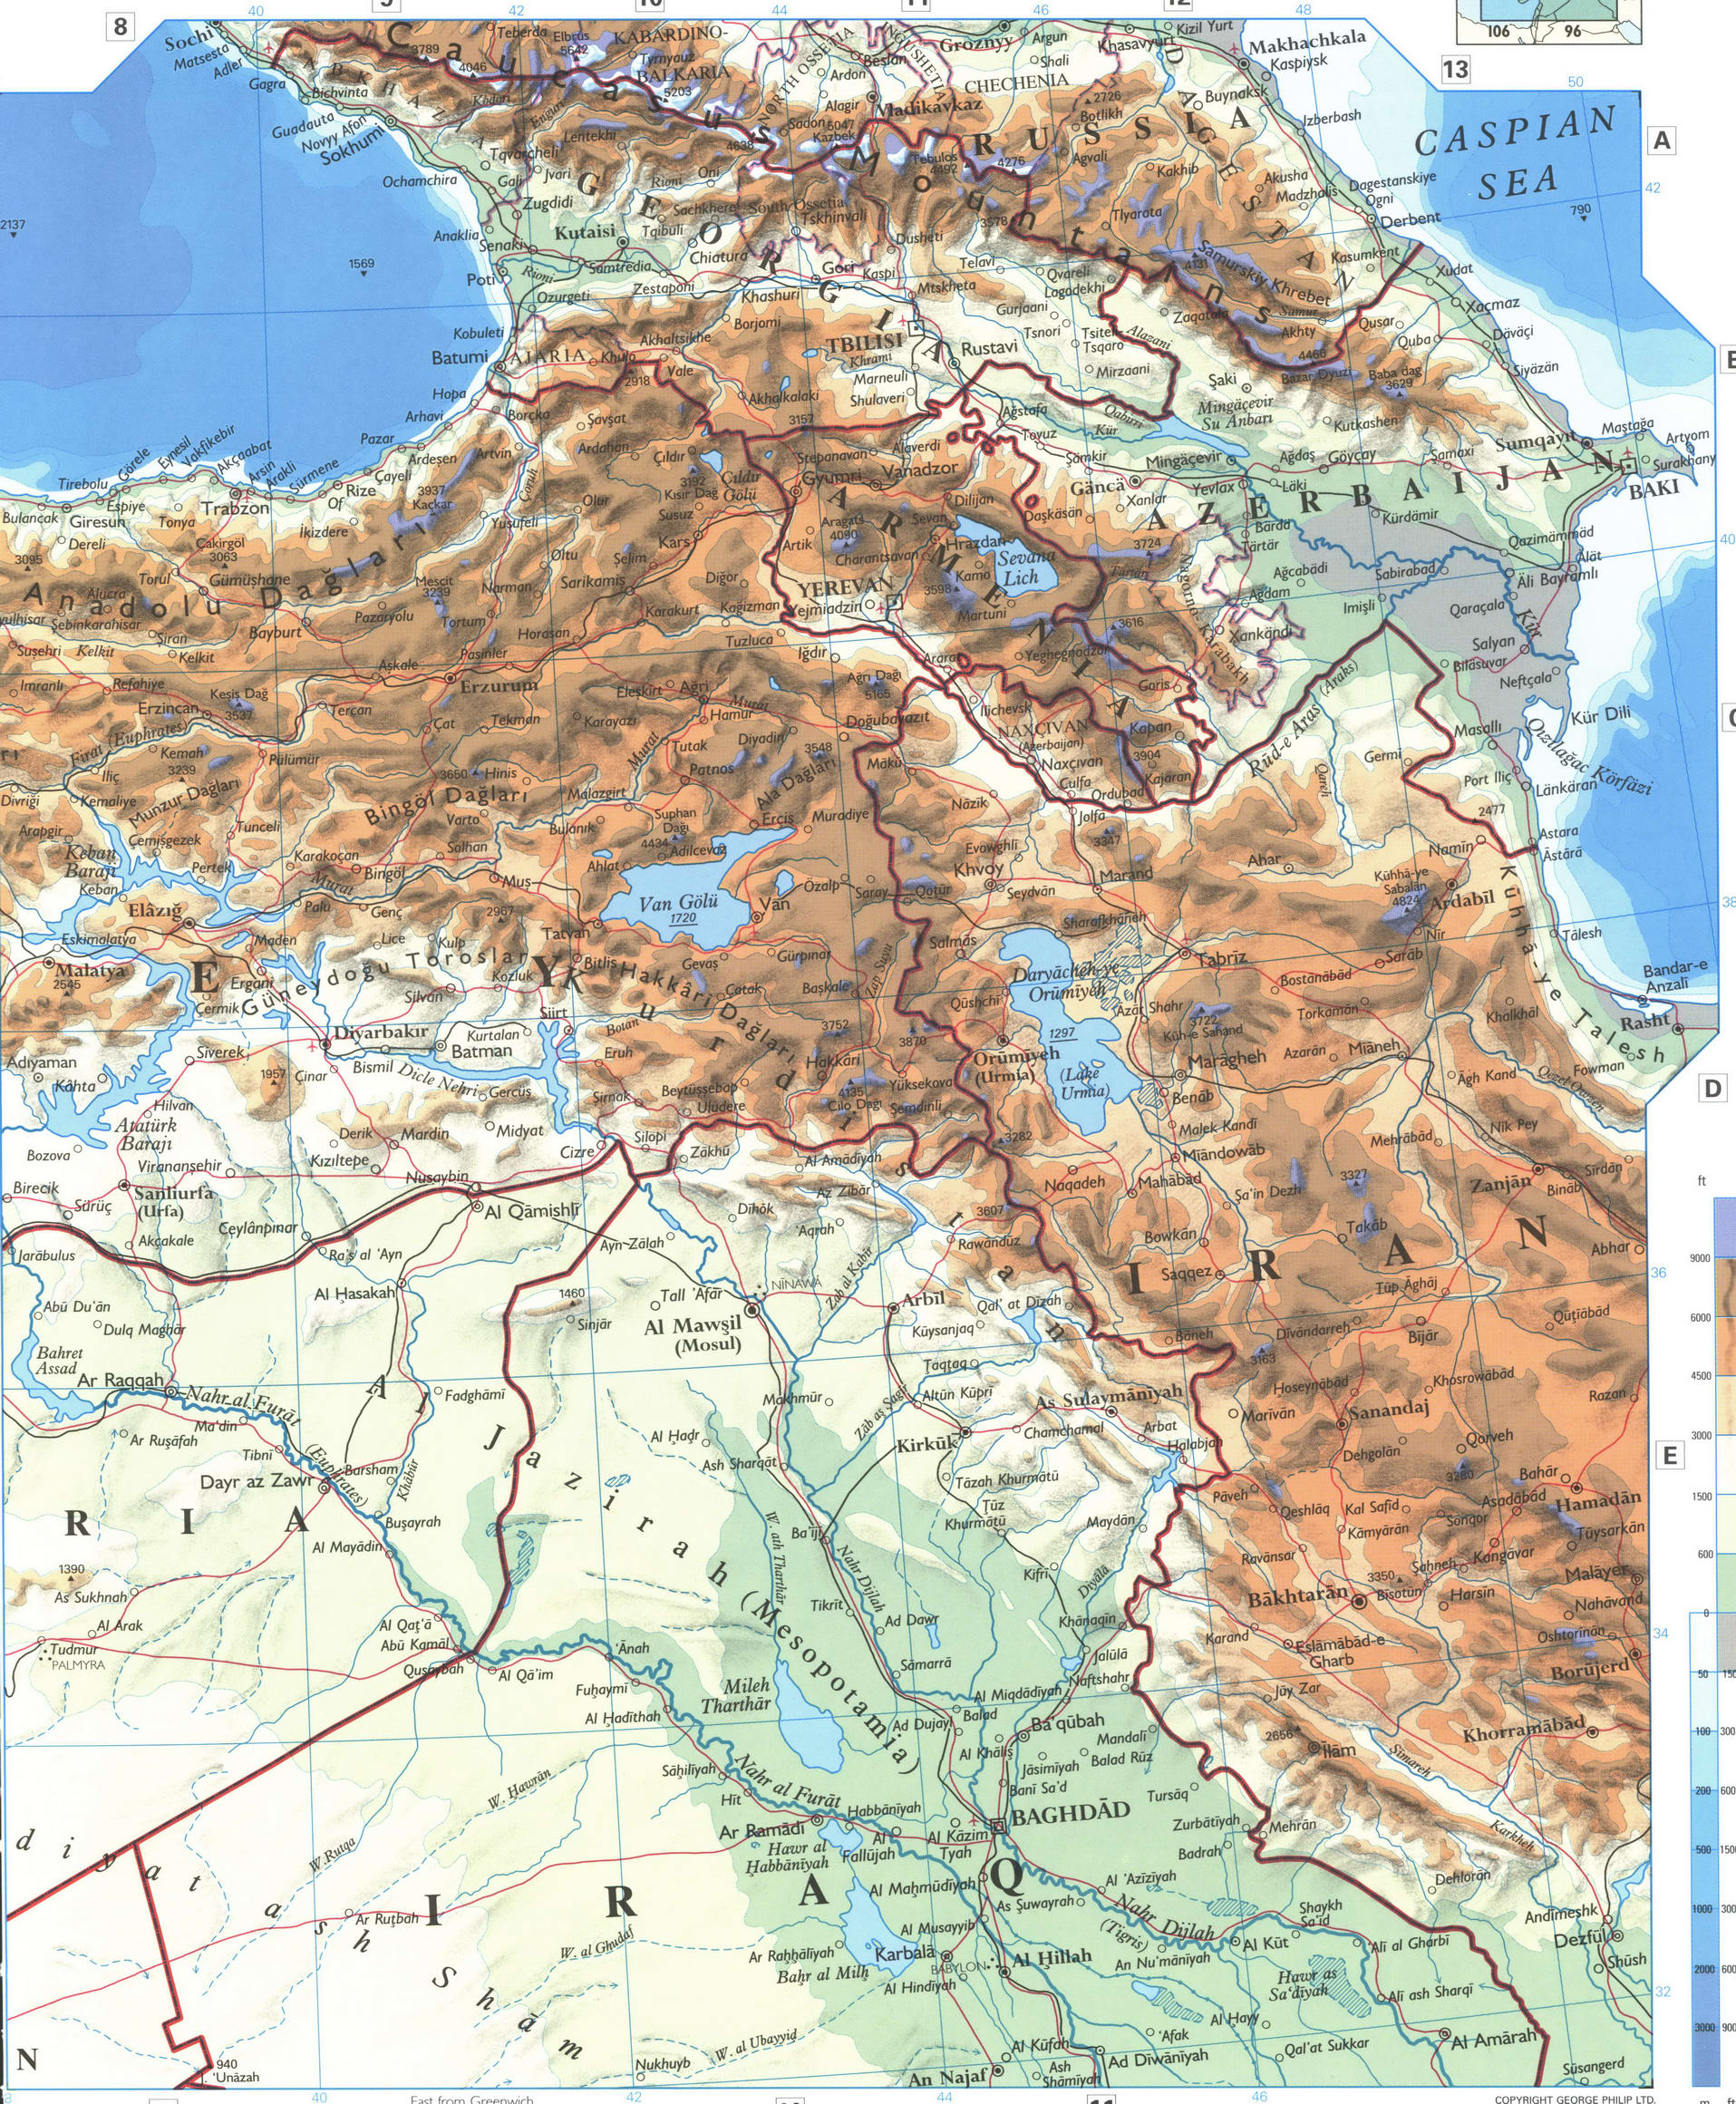 Turkey and Syria detailed map